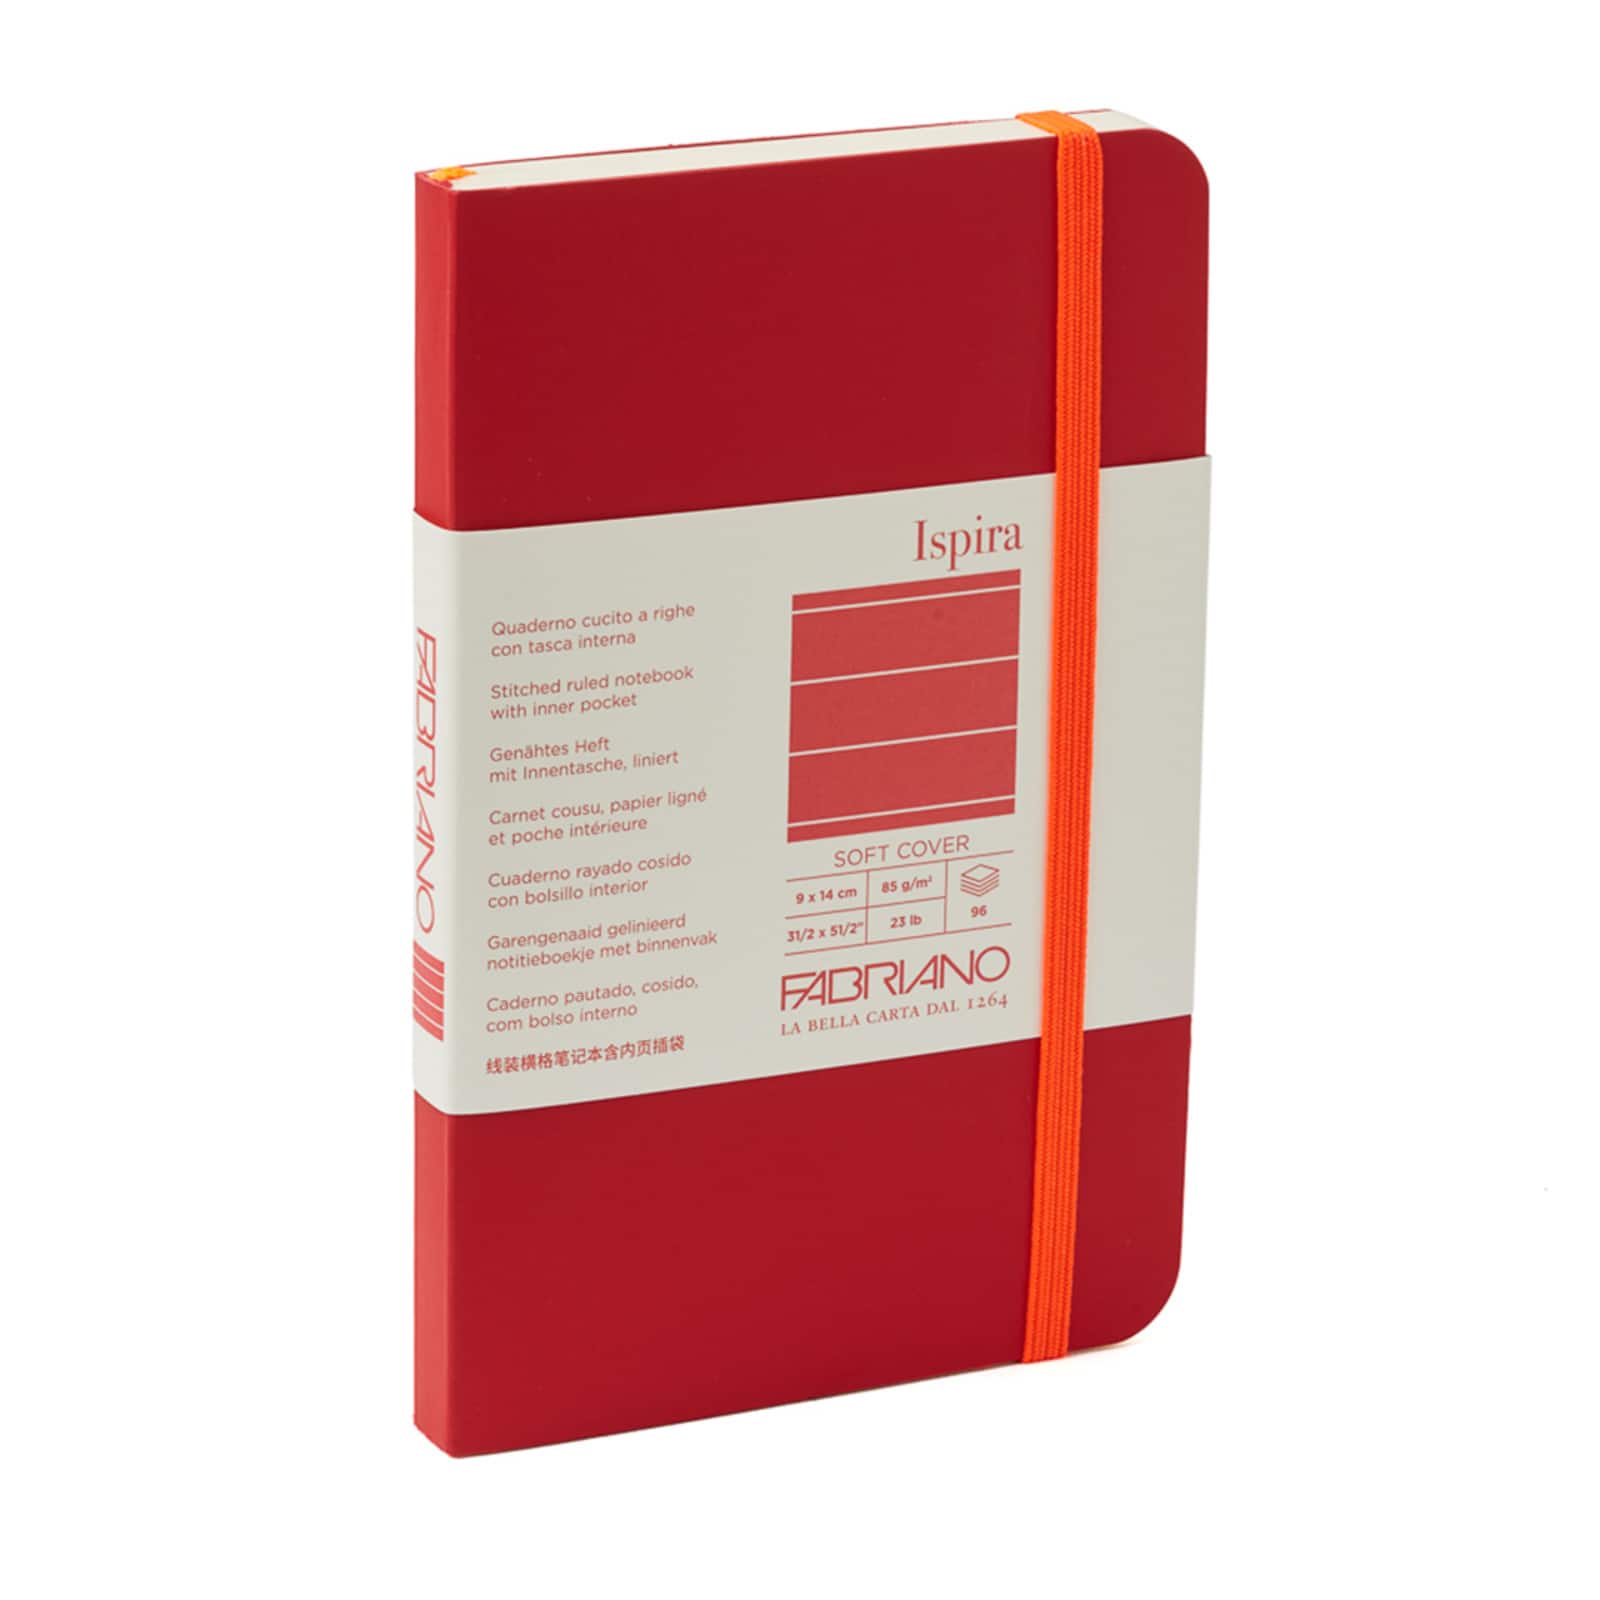 Fabriano® Ispira Lined Softcover Notebook